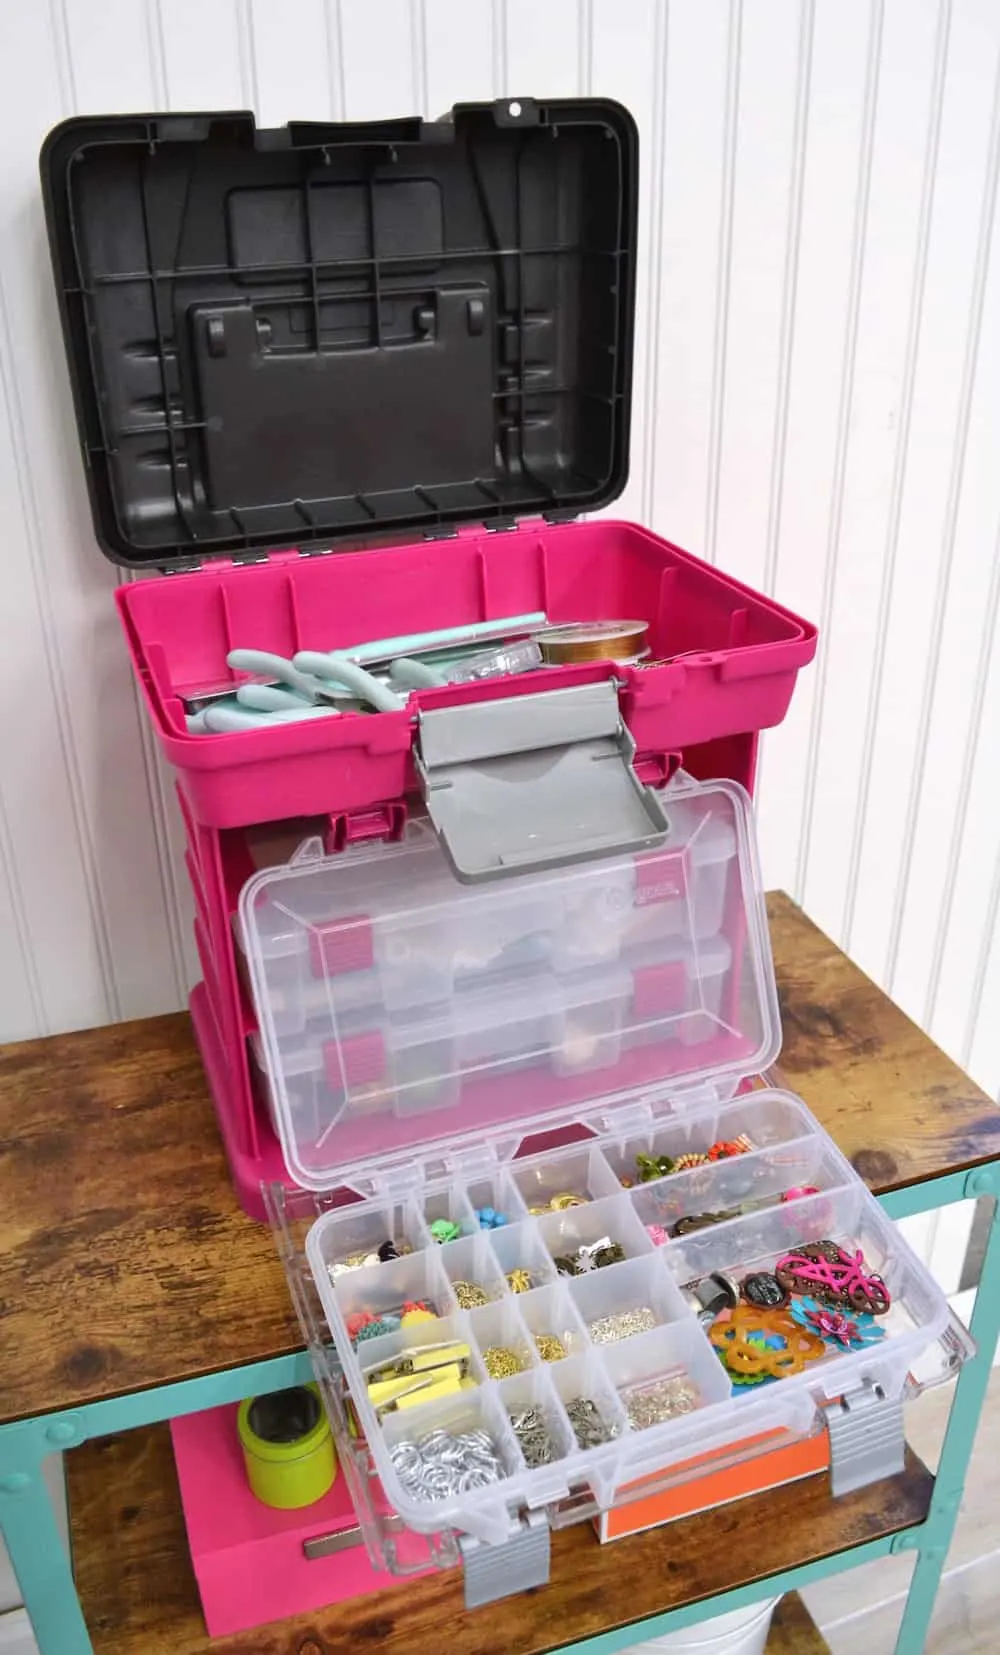 Organizing Jewelry Supplies: A Practical Guide - The Crafty Blog Stalker